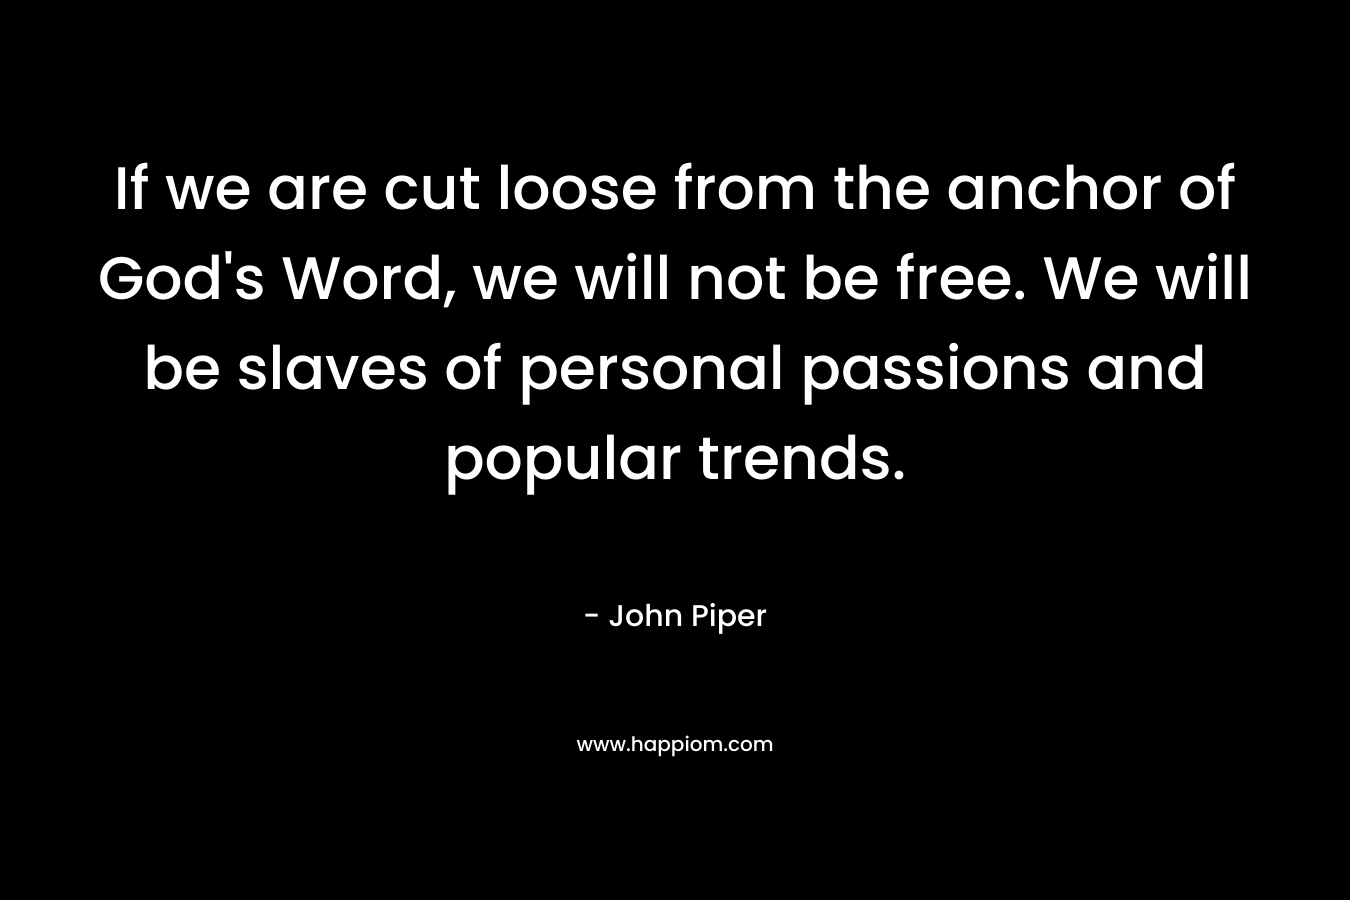 If we are cut loose from the anchor of God's Word, we will not be free. We will be slaves of personal passions and popular trends.